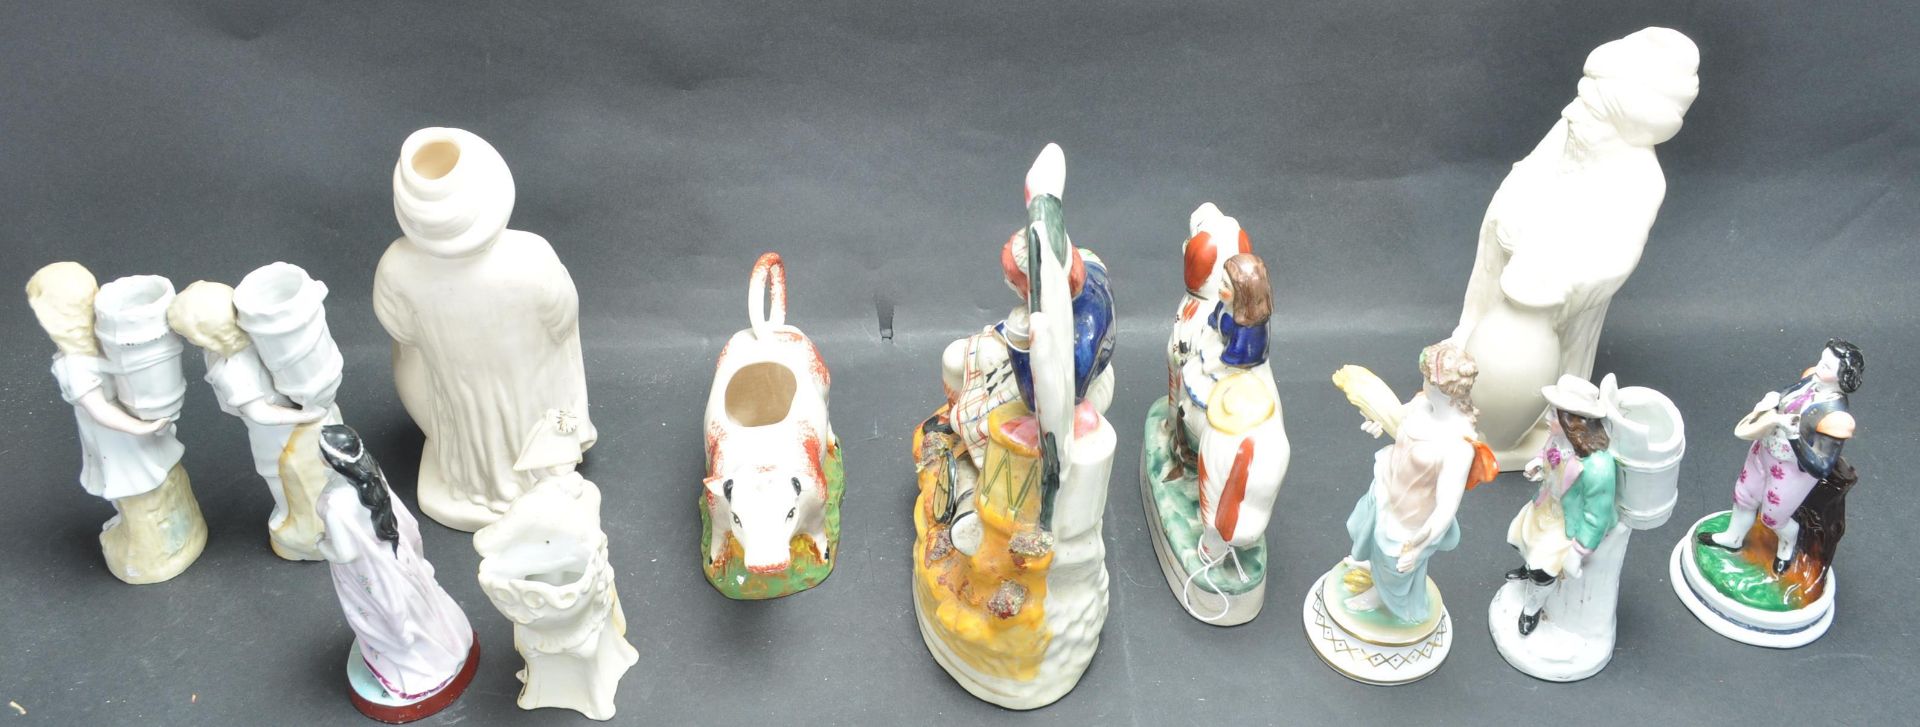 LARGE COLLECTION OF 20TH CENTURY CERAMICS - Image 5 of 6